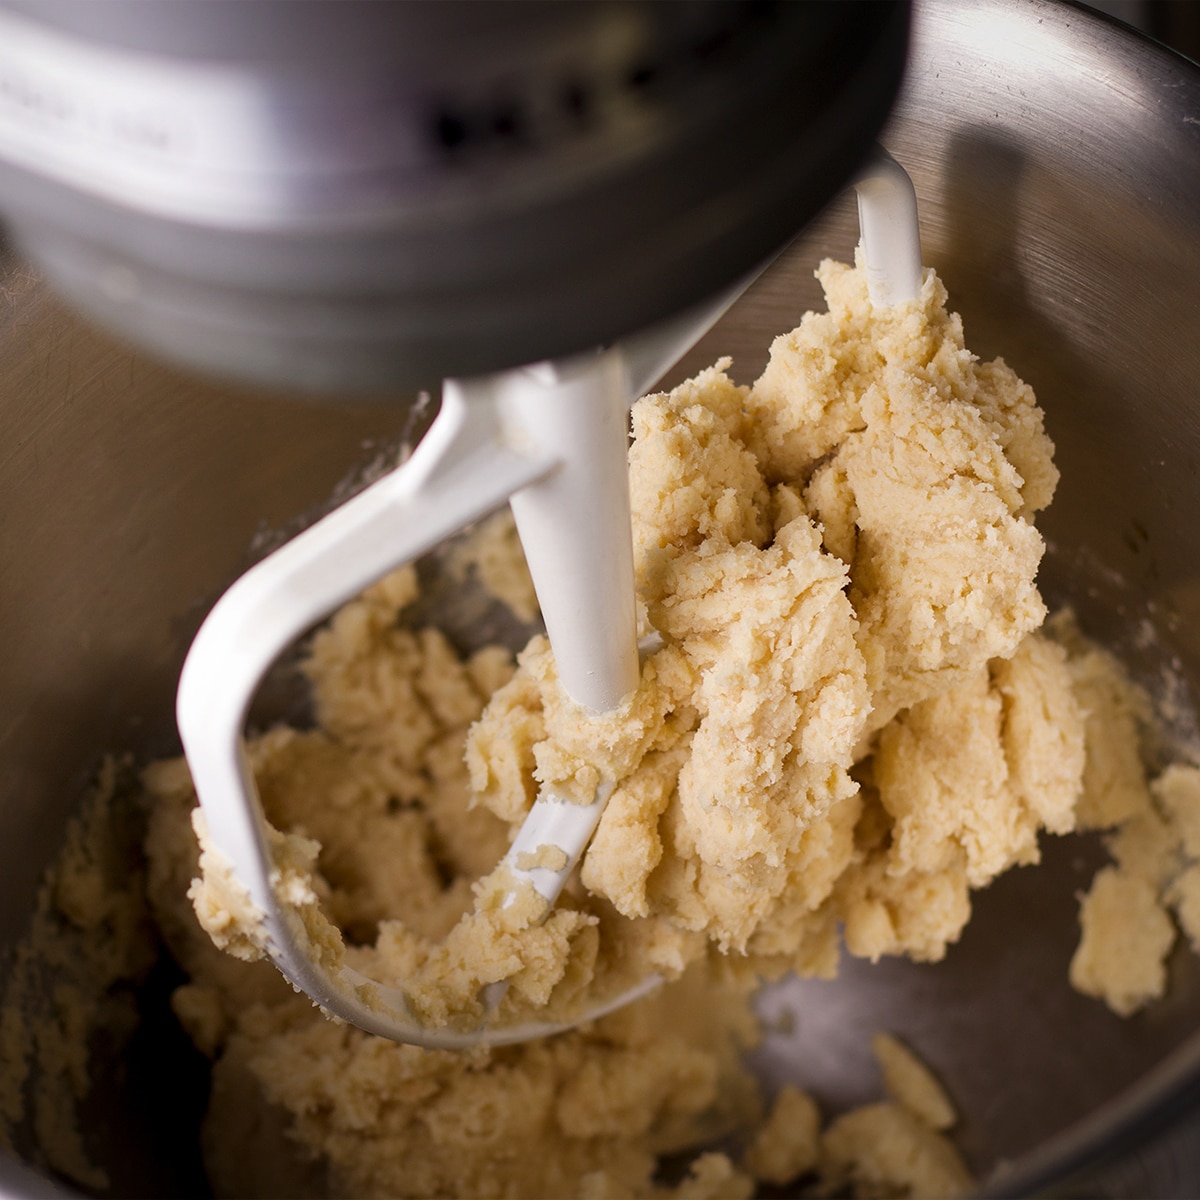 Looking down into the bowl of an electric mixer as it beats shortbread dough.